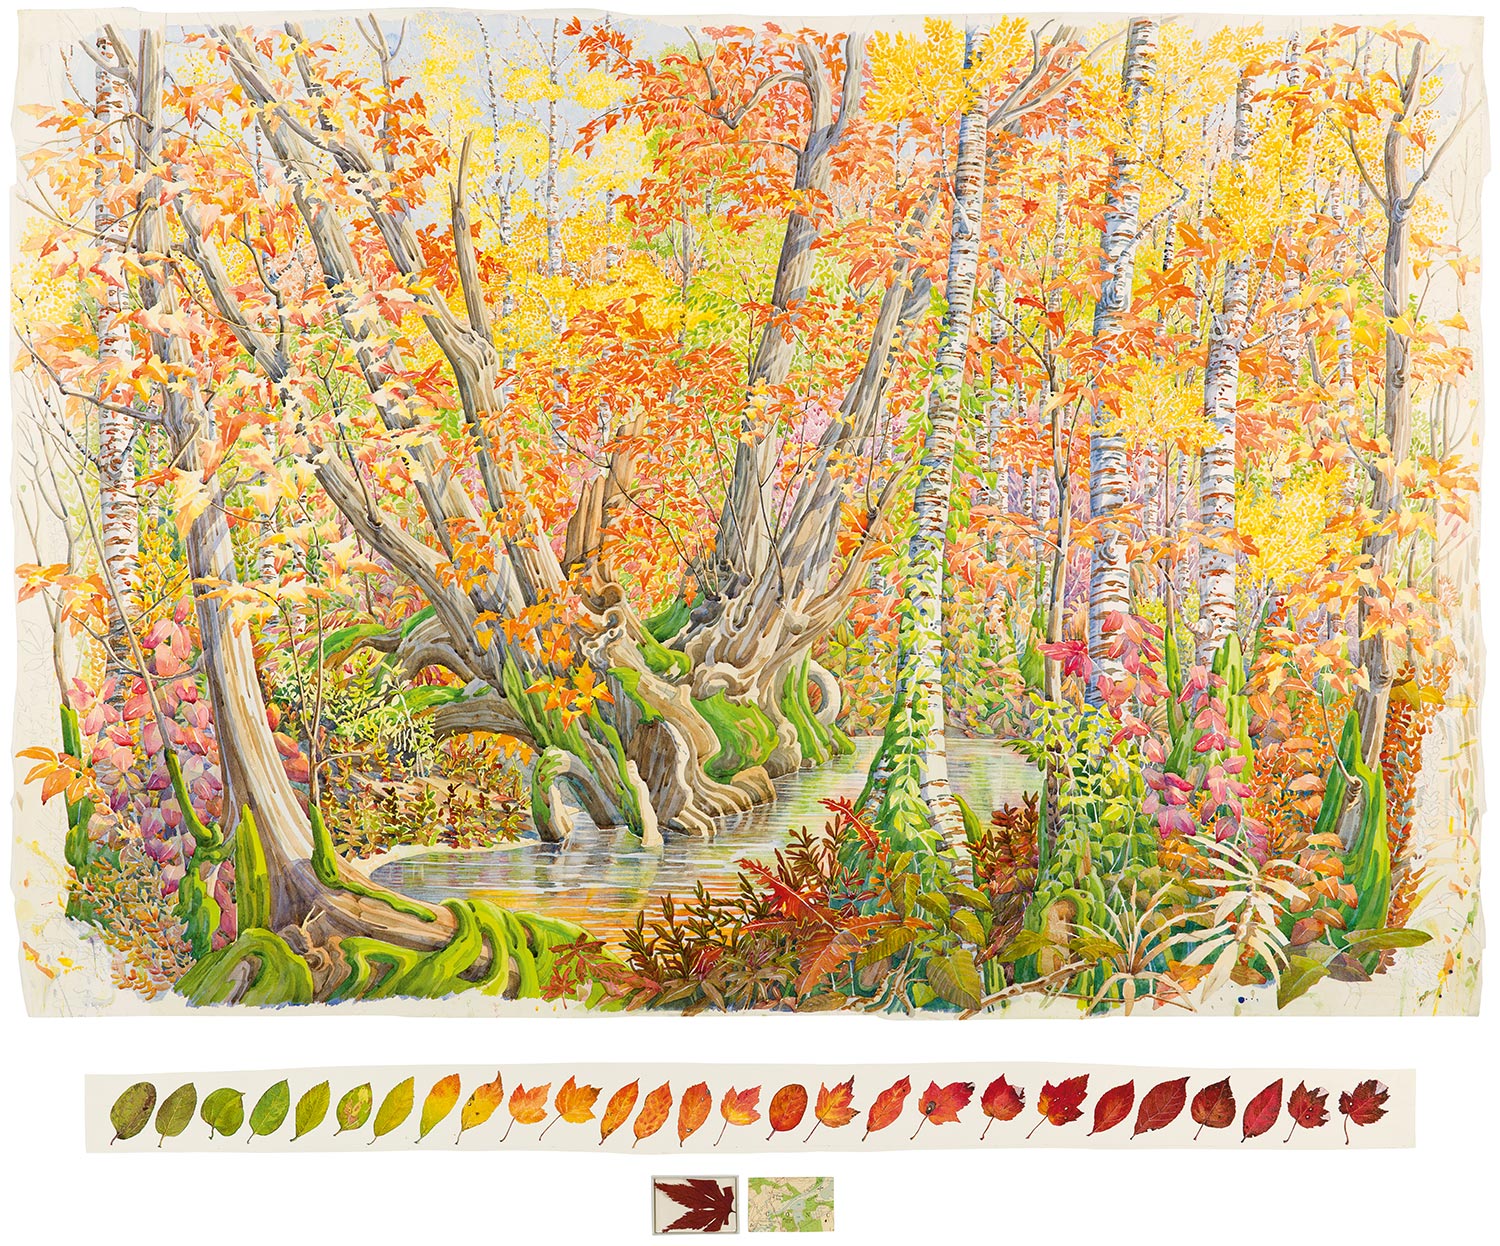  Tony Foster,  Fall Colour in Great Meadow, Concord , 2012. Watercolor and graphite on paper, maple leaf, acrylic box, map. 36 x 52 3/4 in. | 3 3/8 x 47 5/8 in. Photo by Trevor Burrows Photography. Courtesy of Foster Art &amp; Wilderness Foundation. 